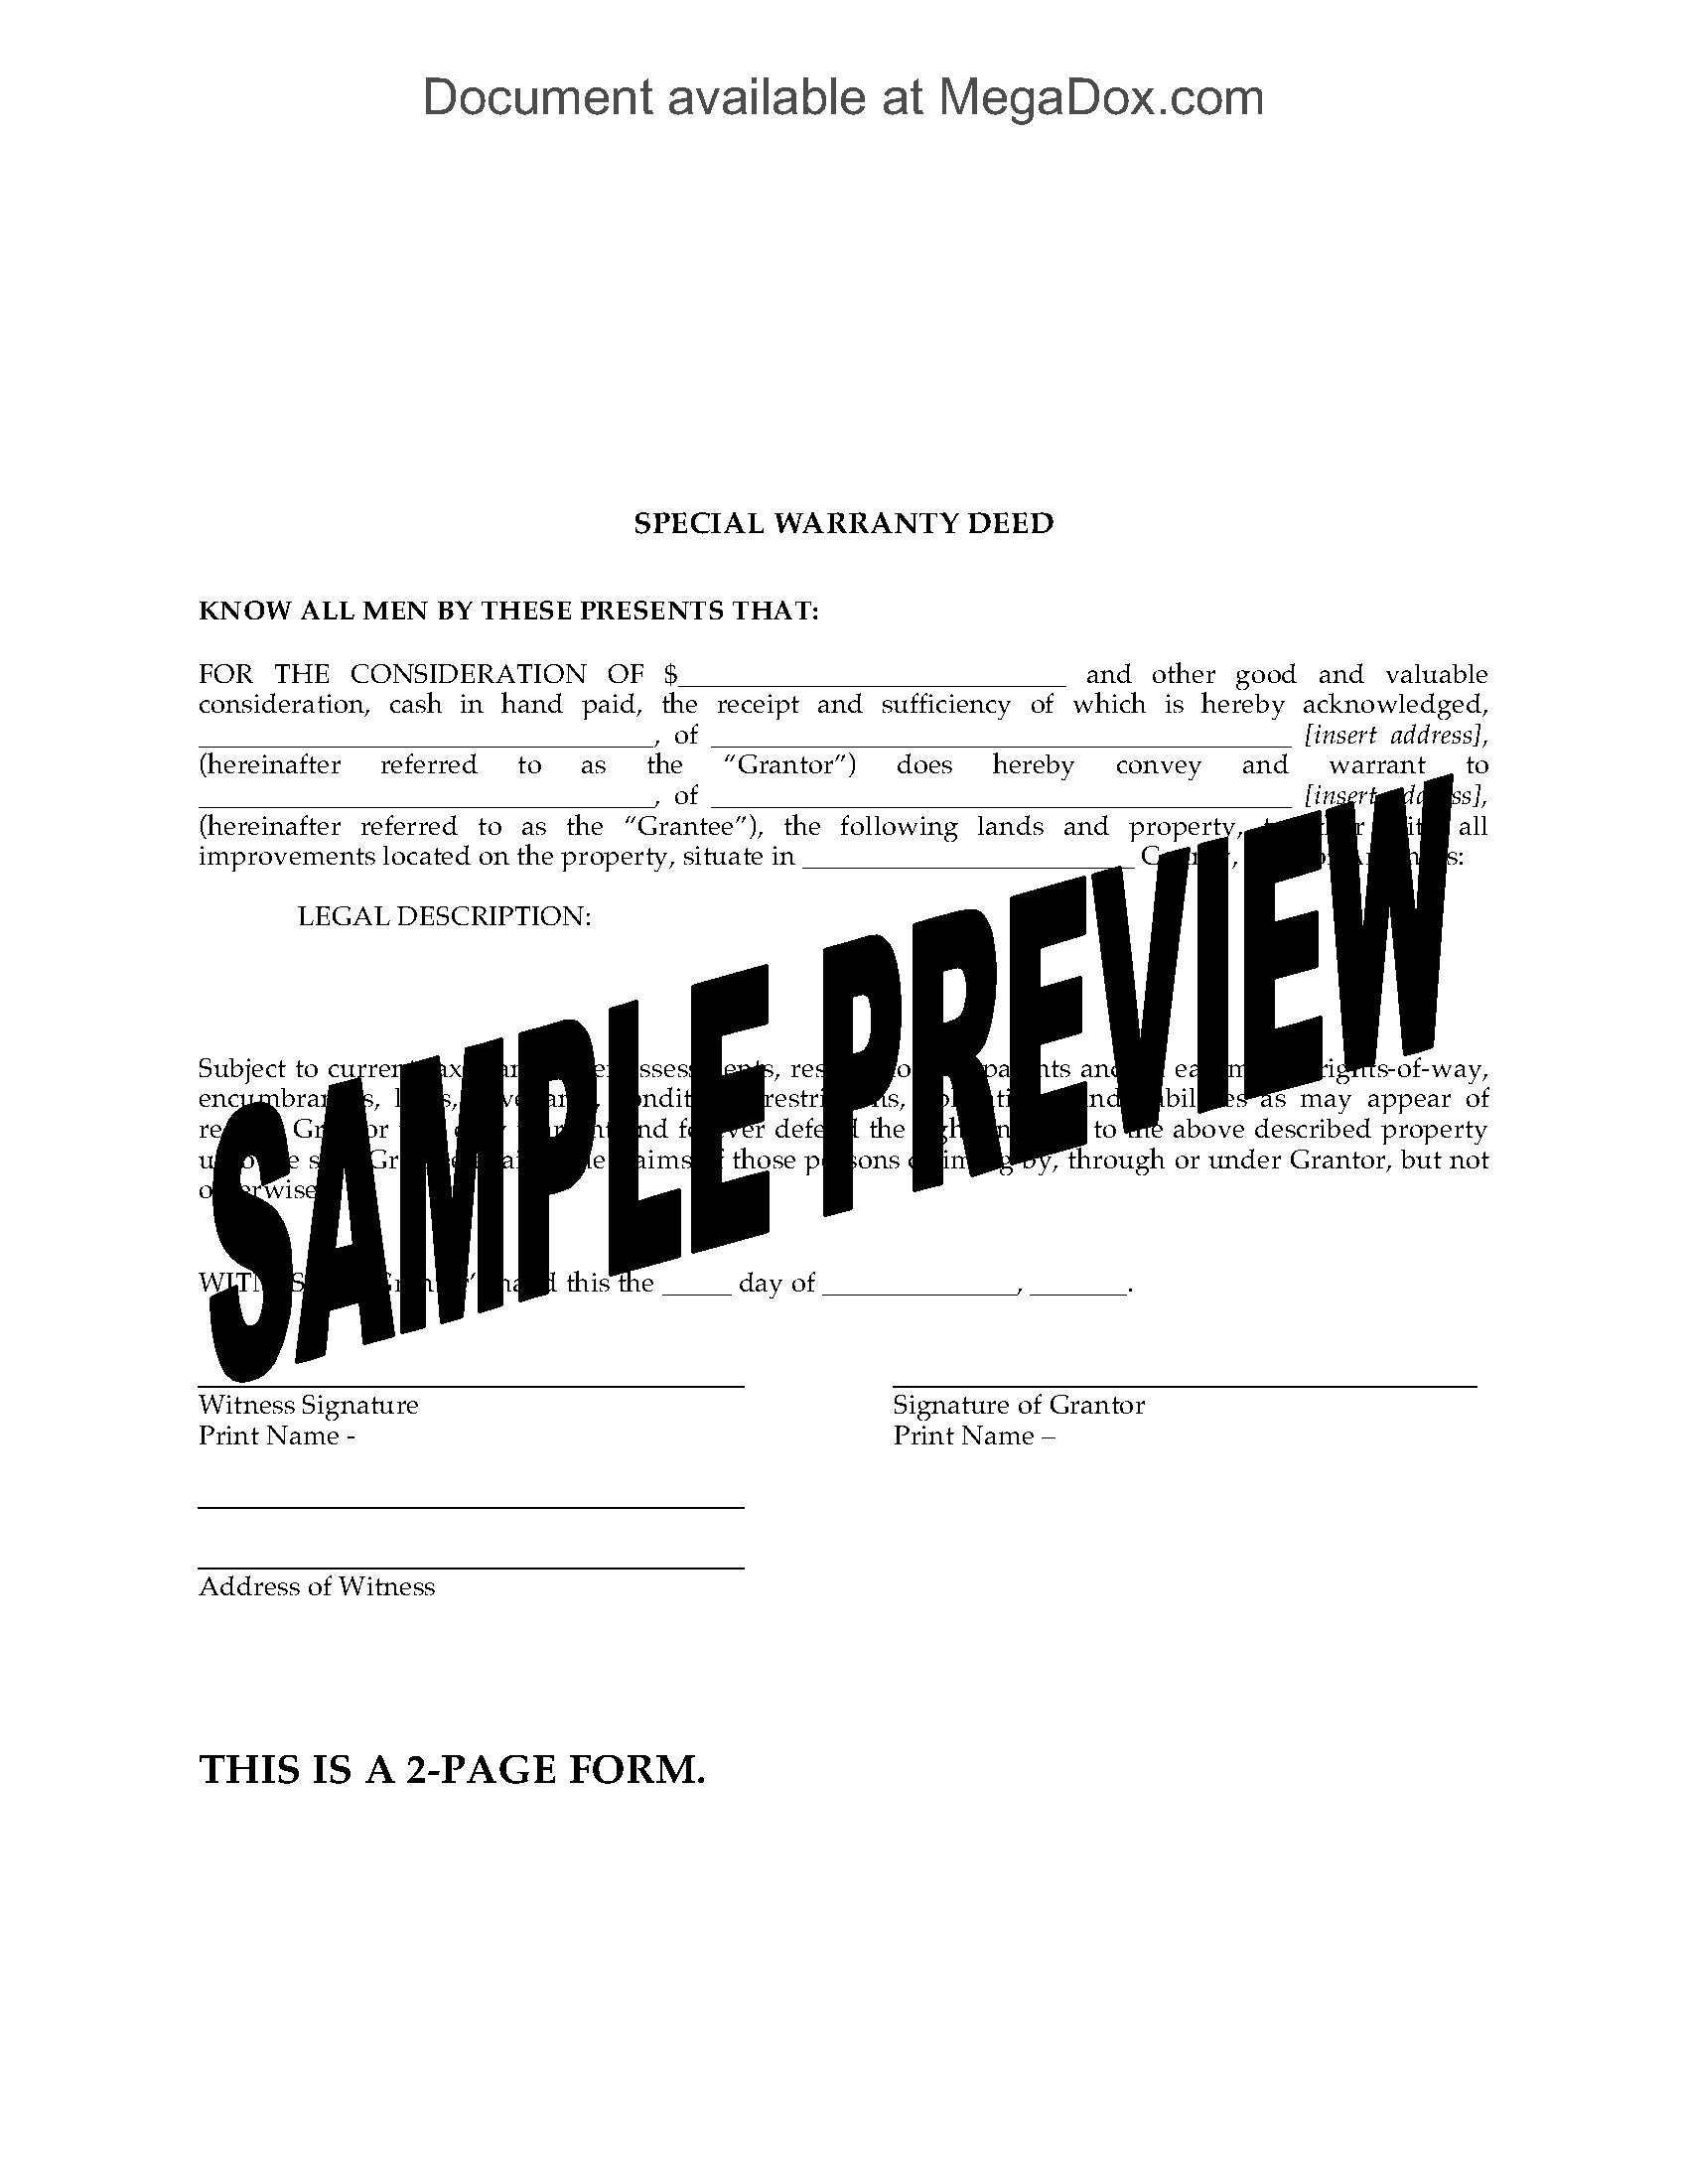 arkansas-special-warranty-deed-legal-forms-and-business-templates